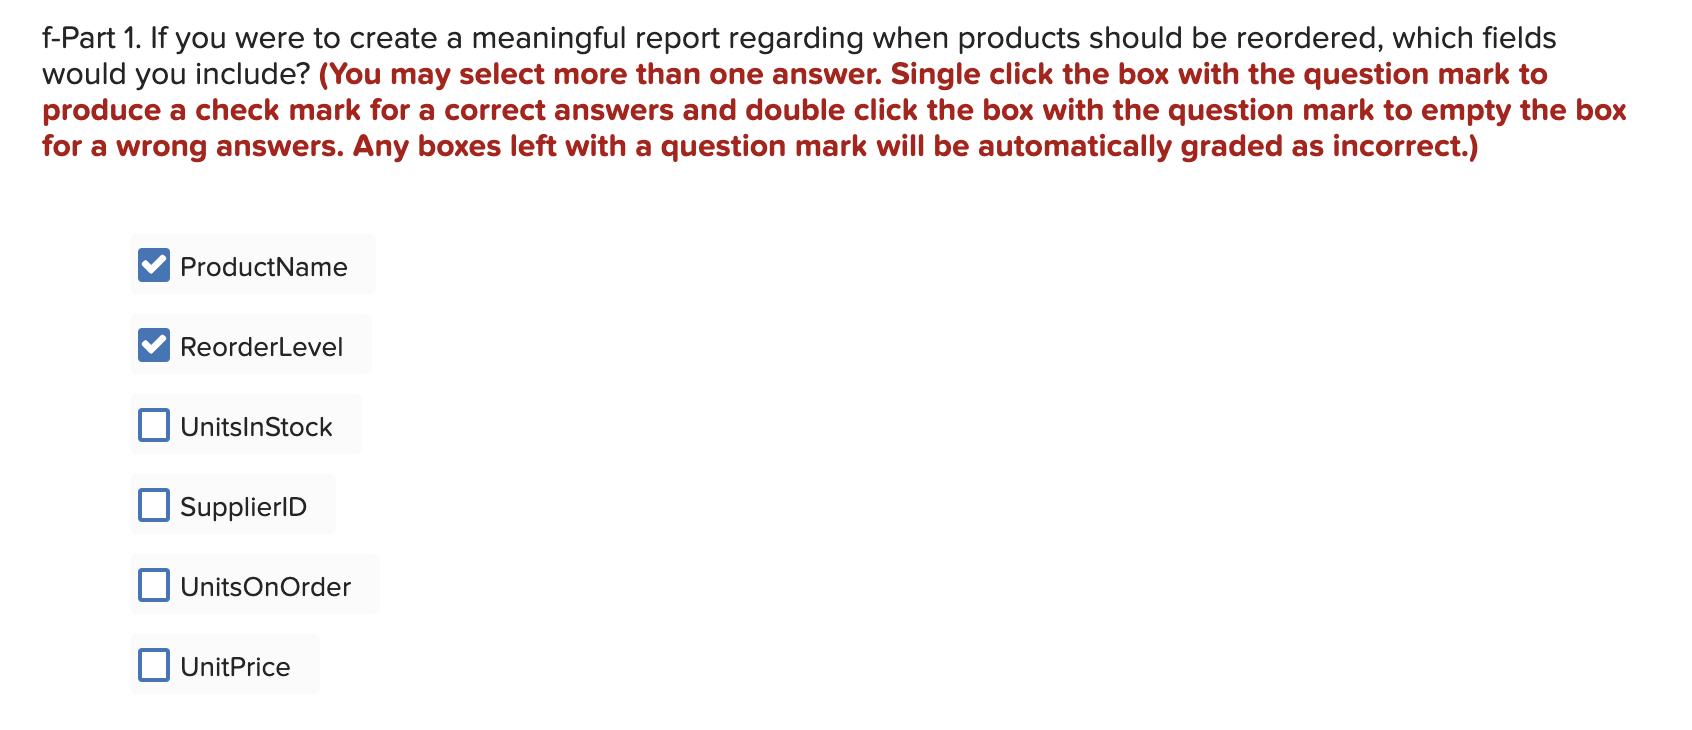 f-Part 1. If you were to create a meaningful report regarding when products should be reordered, which fields would you inclu